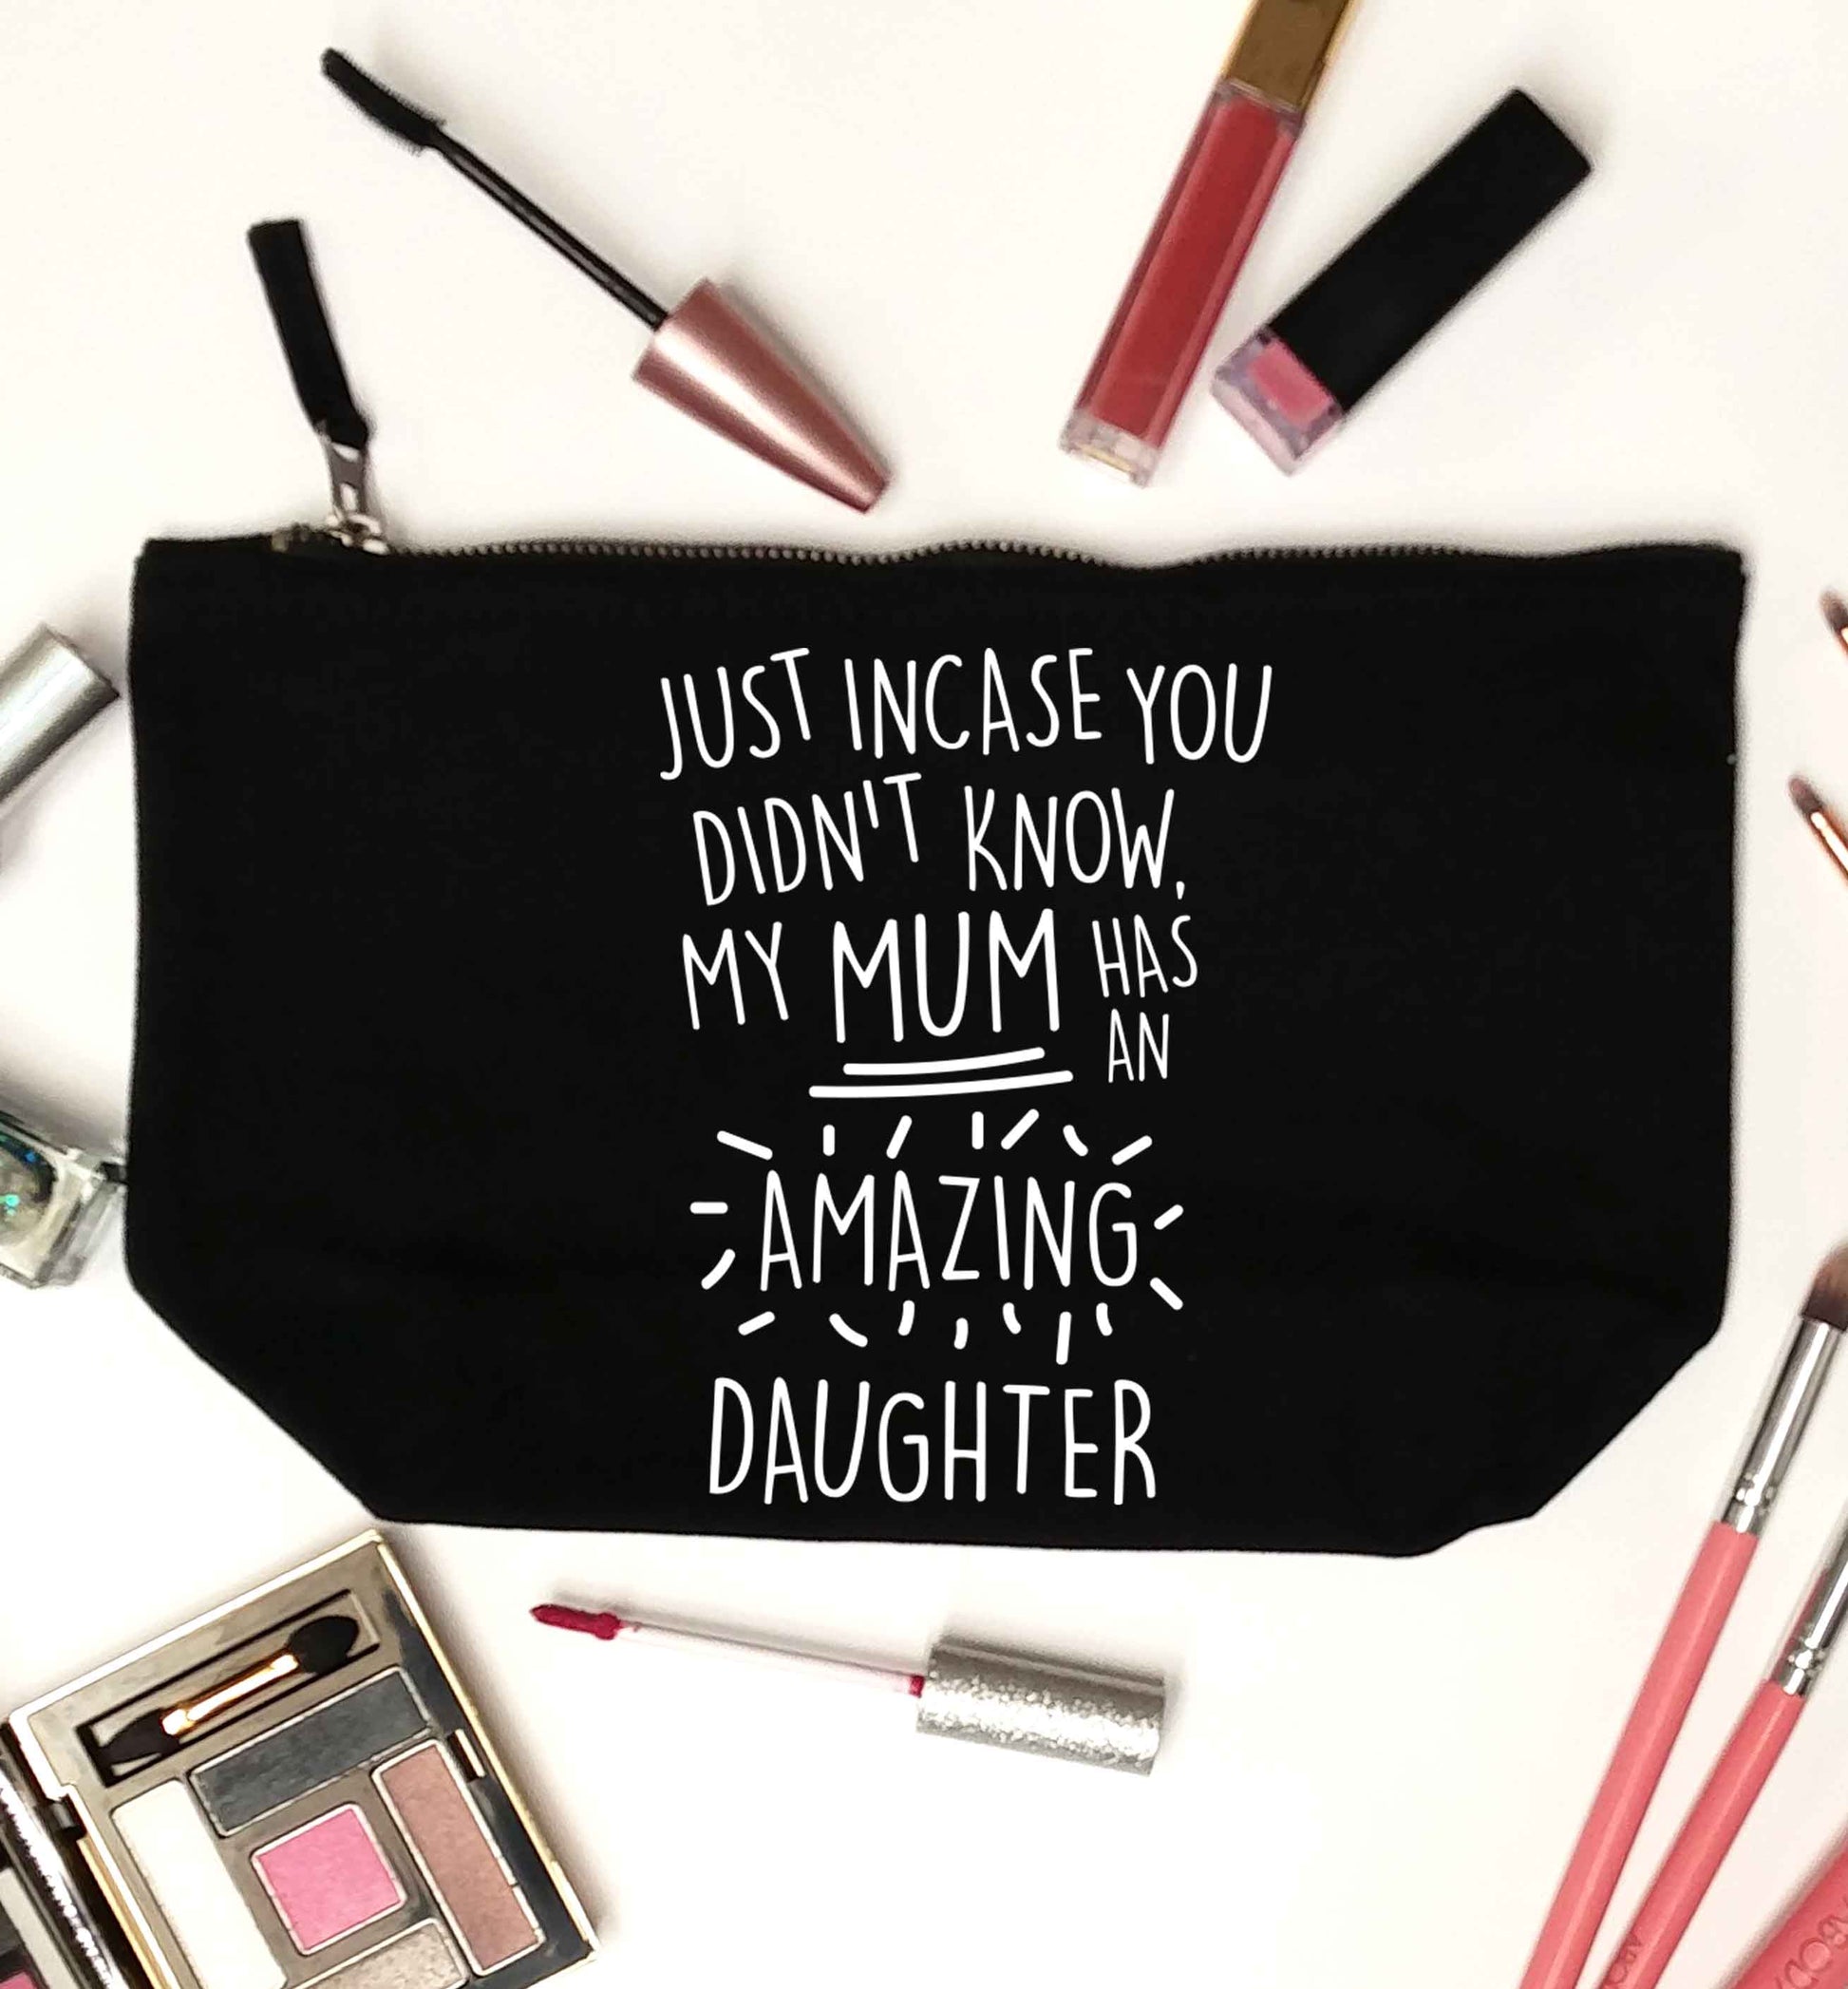 Just incase you didn't know my mum has an amazing daughter black makeup bag